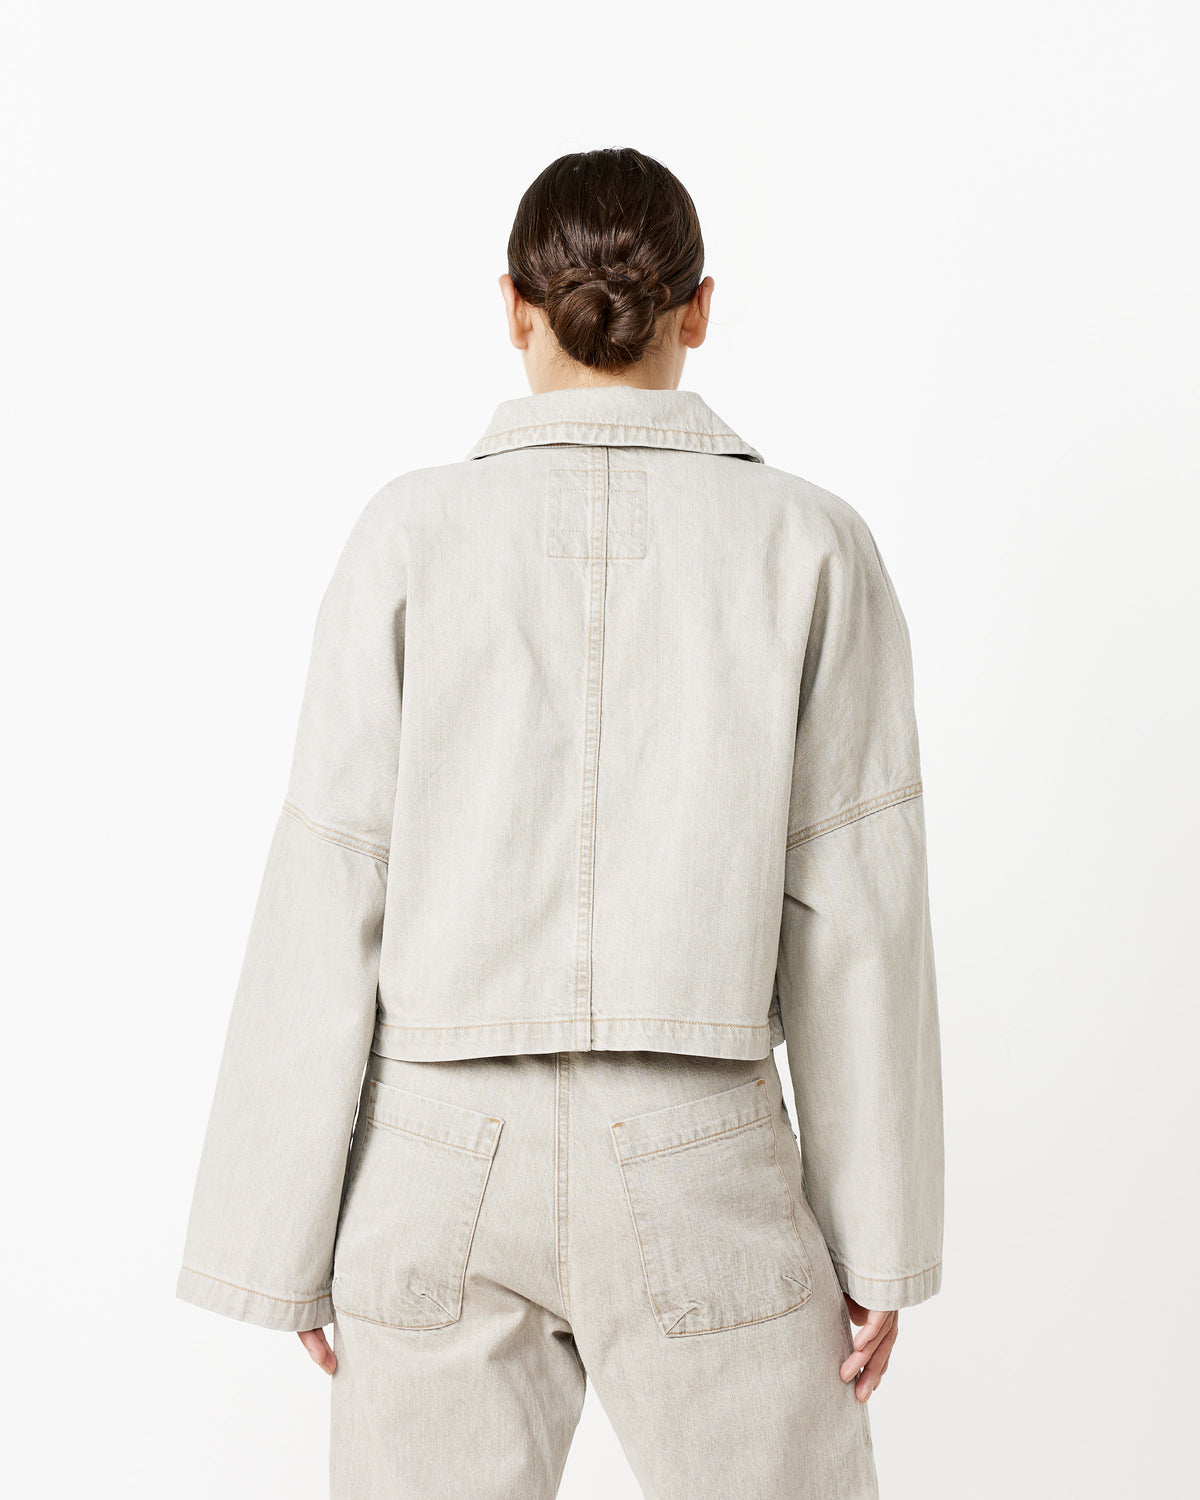 Browse Otero Jacket Rachel Comey plus more. Visit our store today